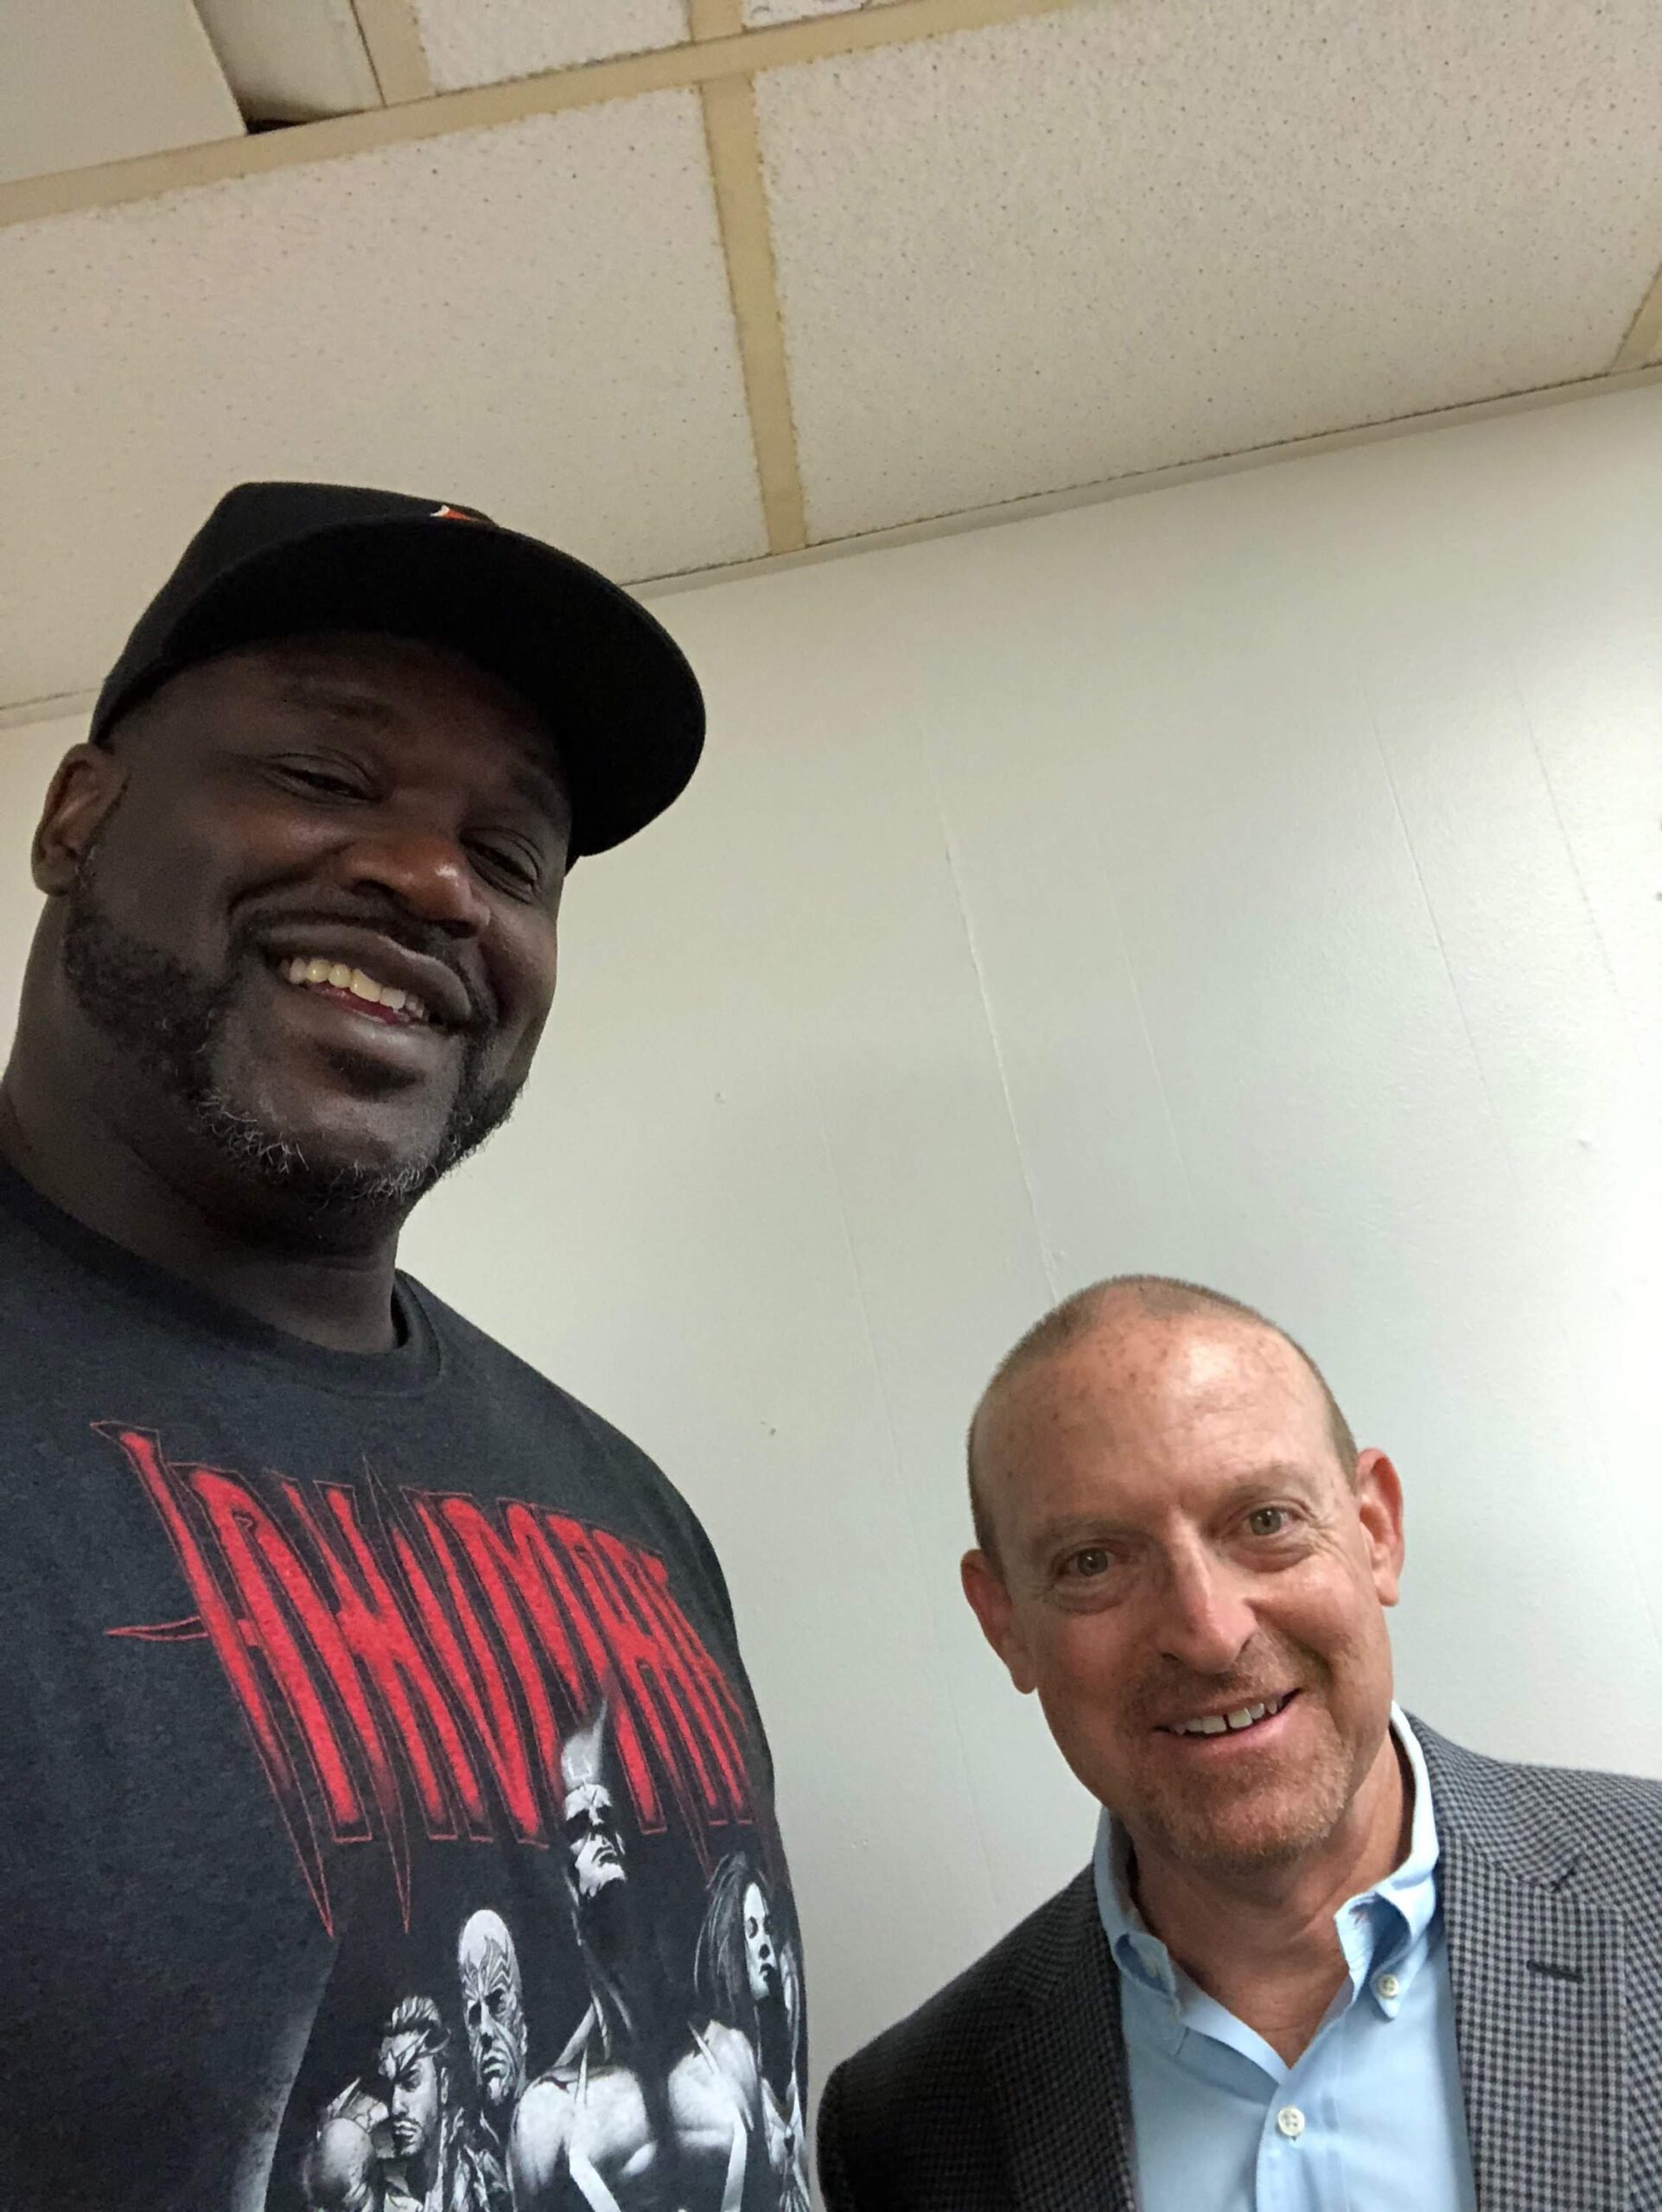 Pat & Shaquille O’Neal, May 2018